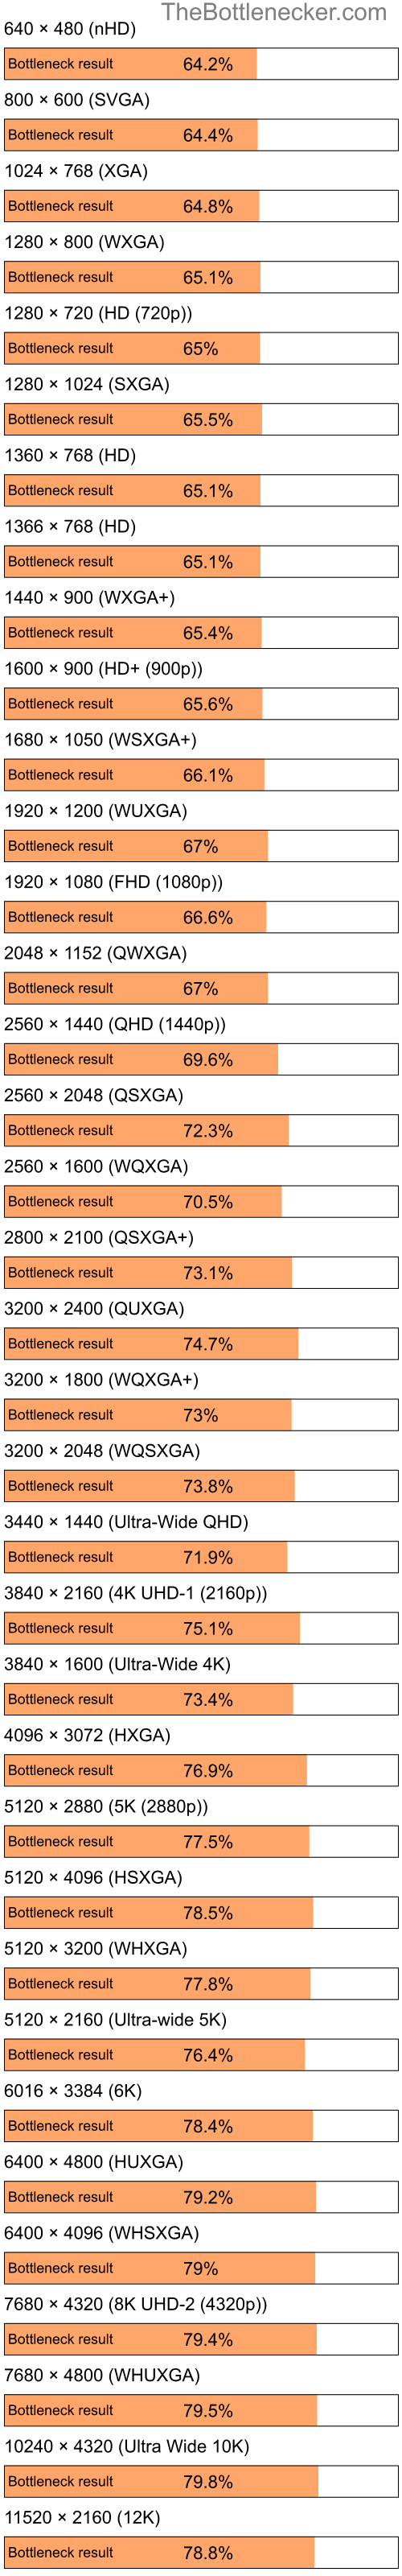 Bottleneck results by resolution for Intel Atom Z520 and AMD Radeon X1650 Pro in General Tasks